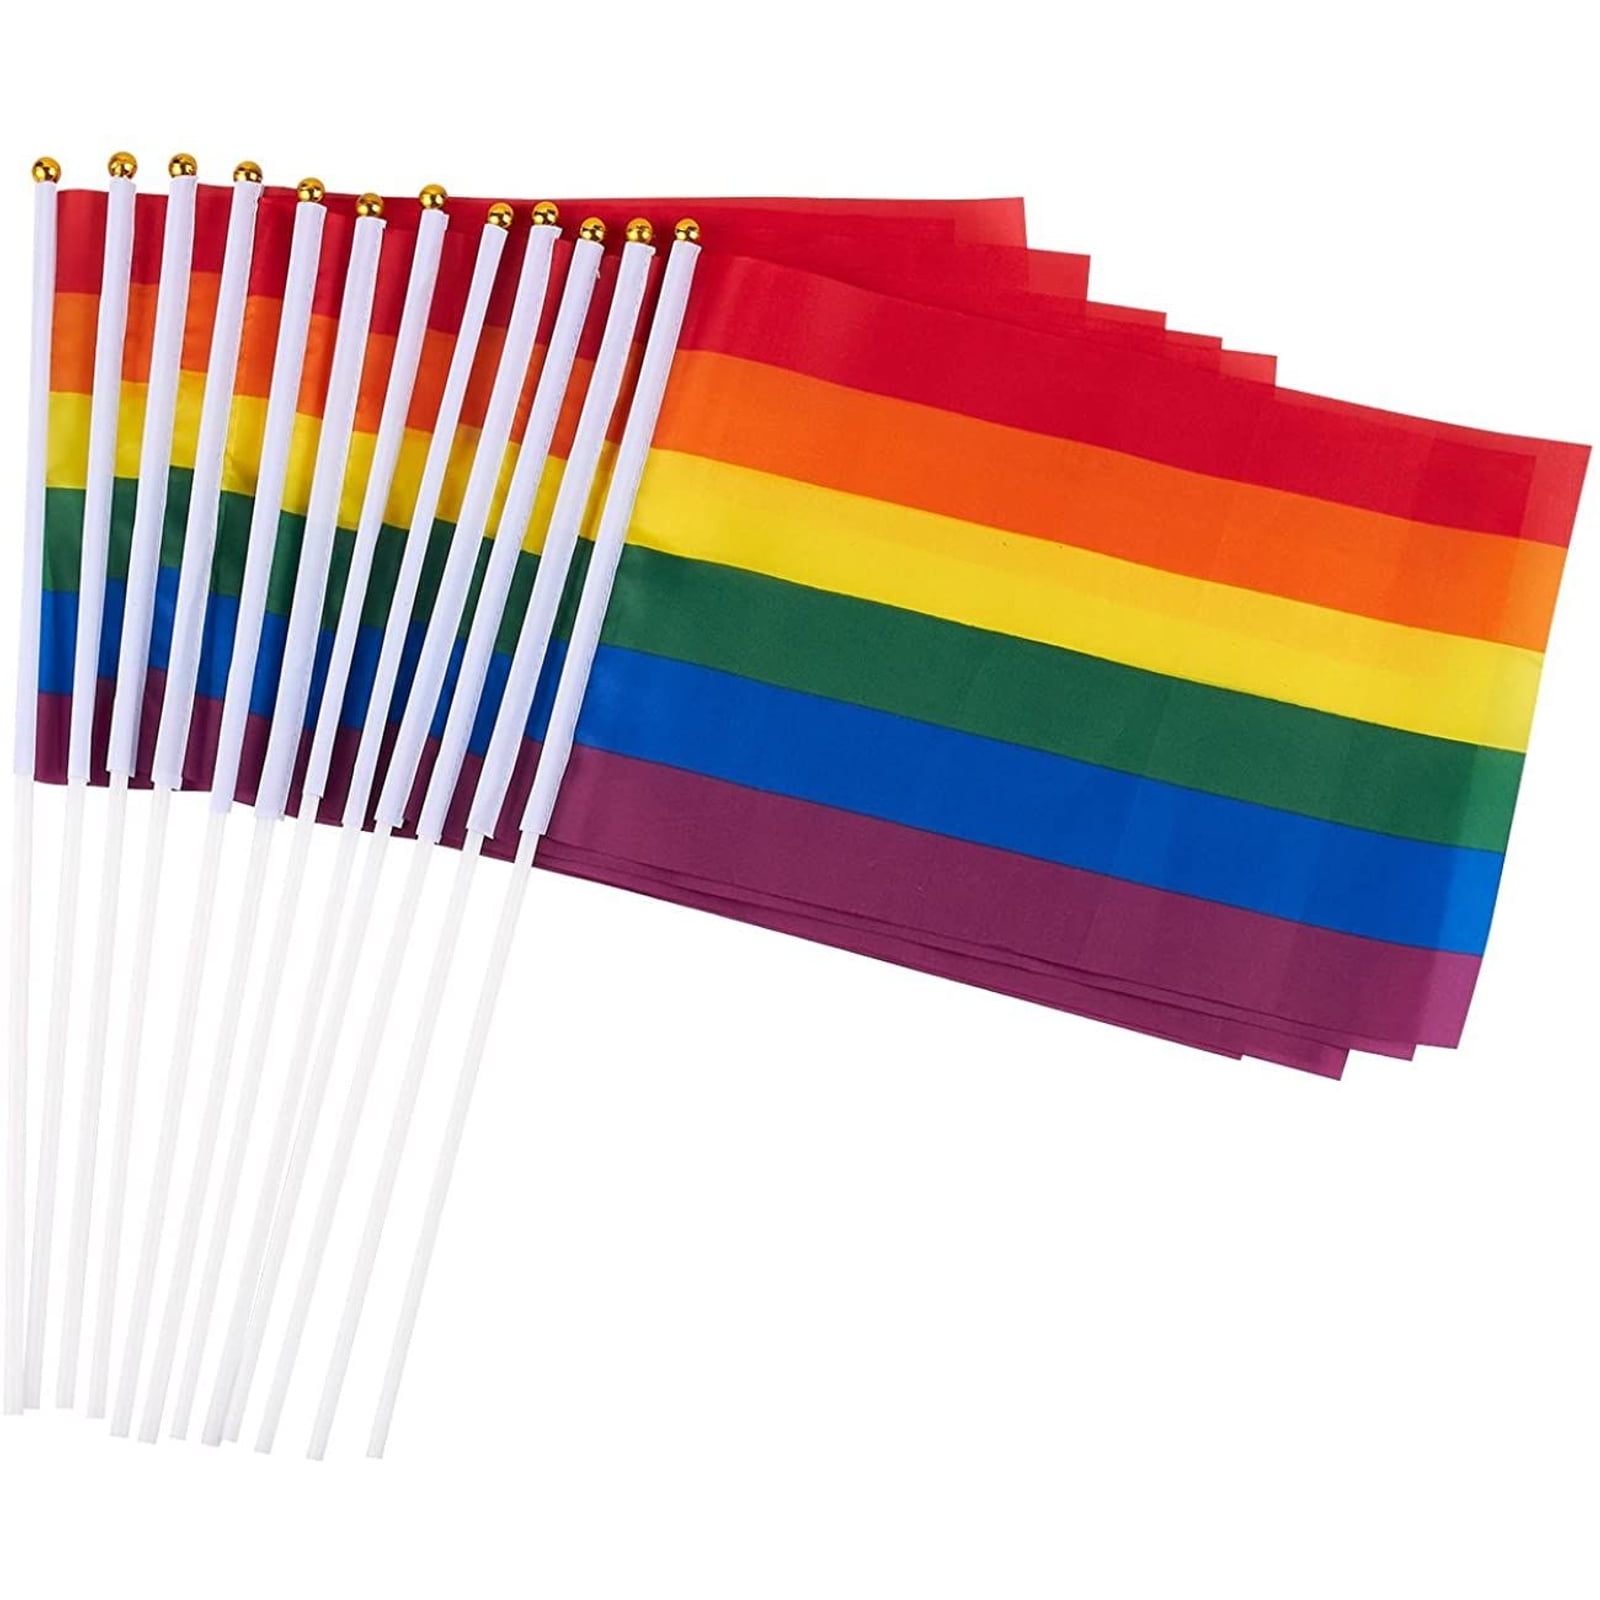 Rainbow Gay Pride Stick Flag HandHeld Mini Flag  Solid Pole 12in X 18in 2 FLAGS 